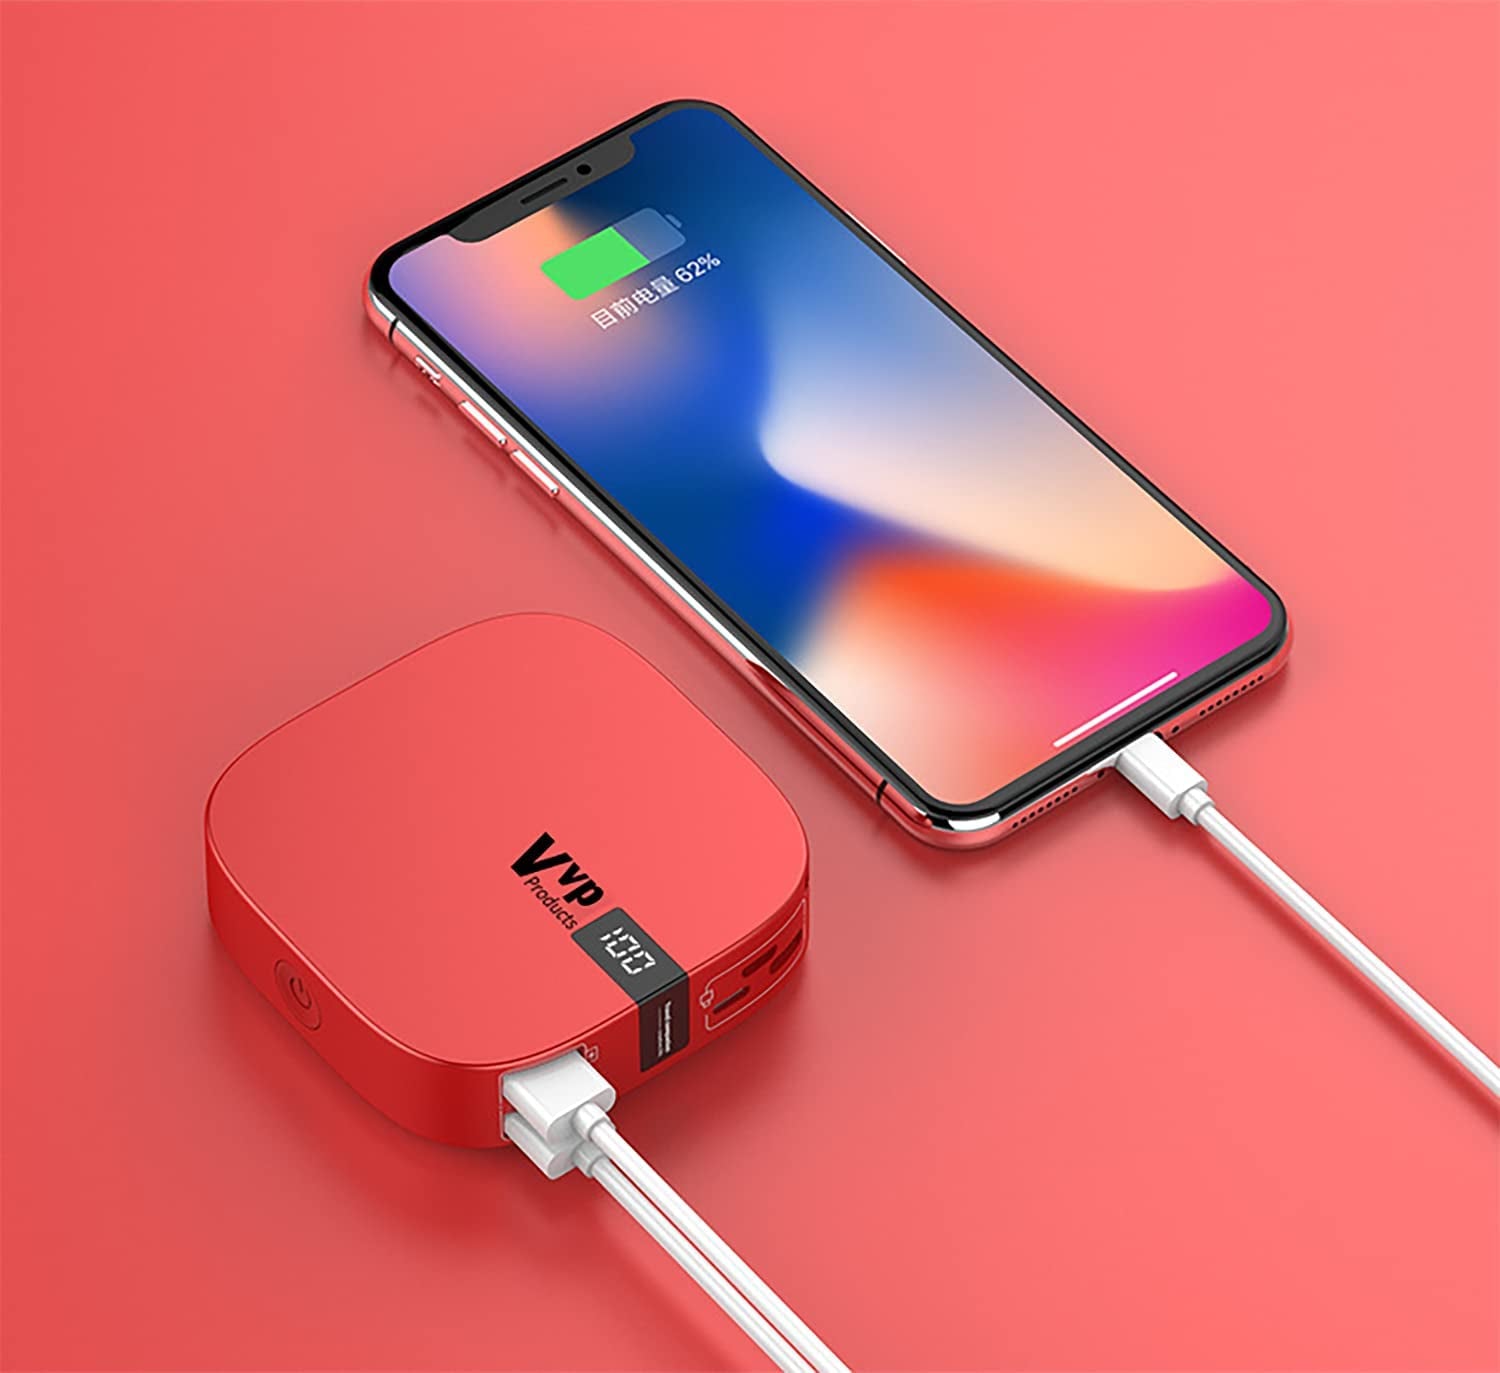 Portable Charger 10000Mah Fast Charging Power Bank, Smallest Lightest and Compact External Battery Pack Compatible with Iphone Android Samsung & More